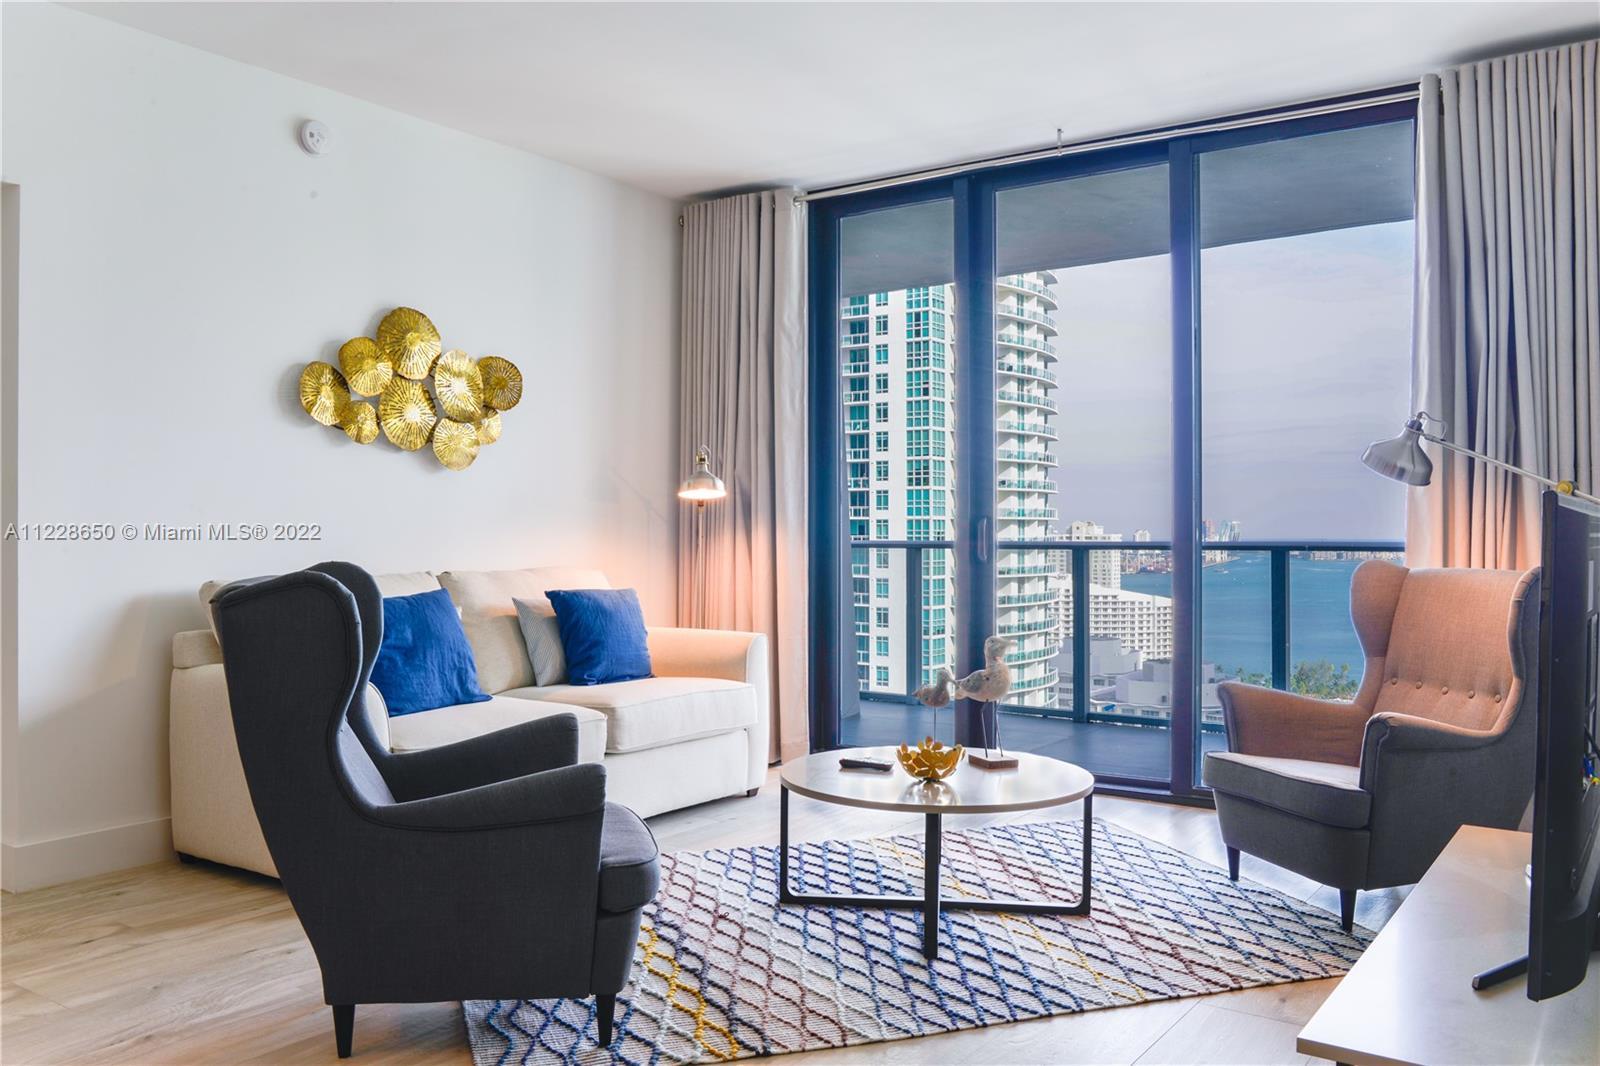 Spectacular upgraded unit at the iconic 1010 Brickell Condo. Unit features: 2 beds, 3 baths + den, a